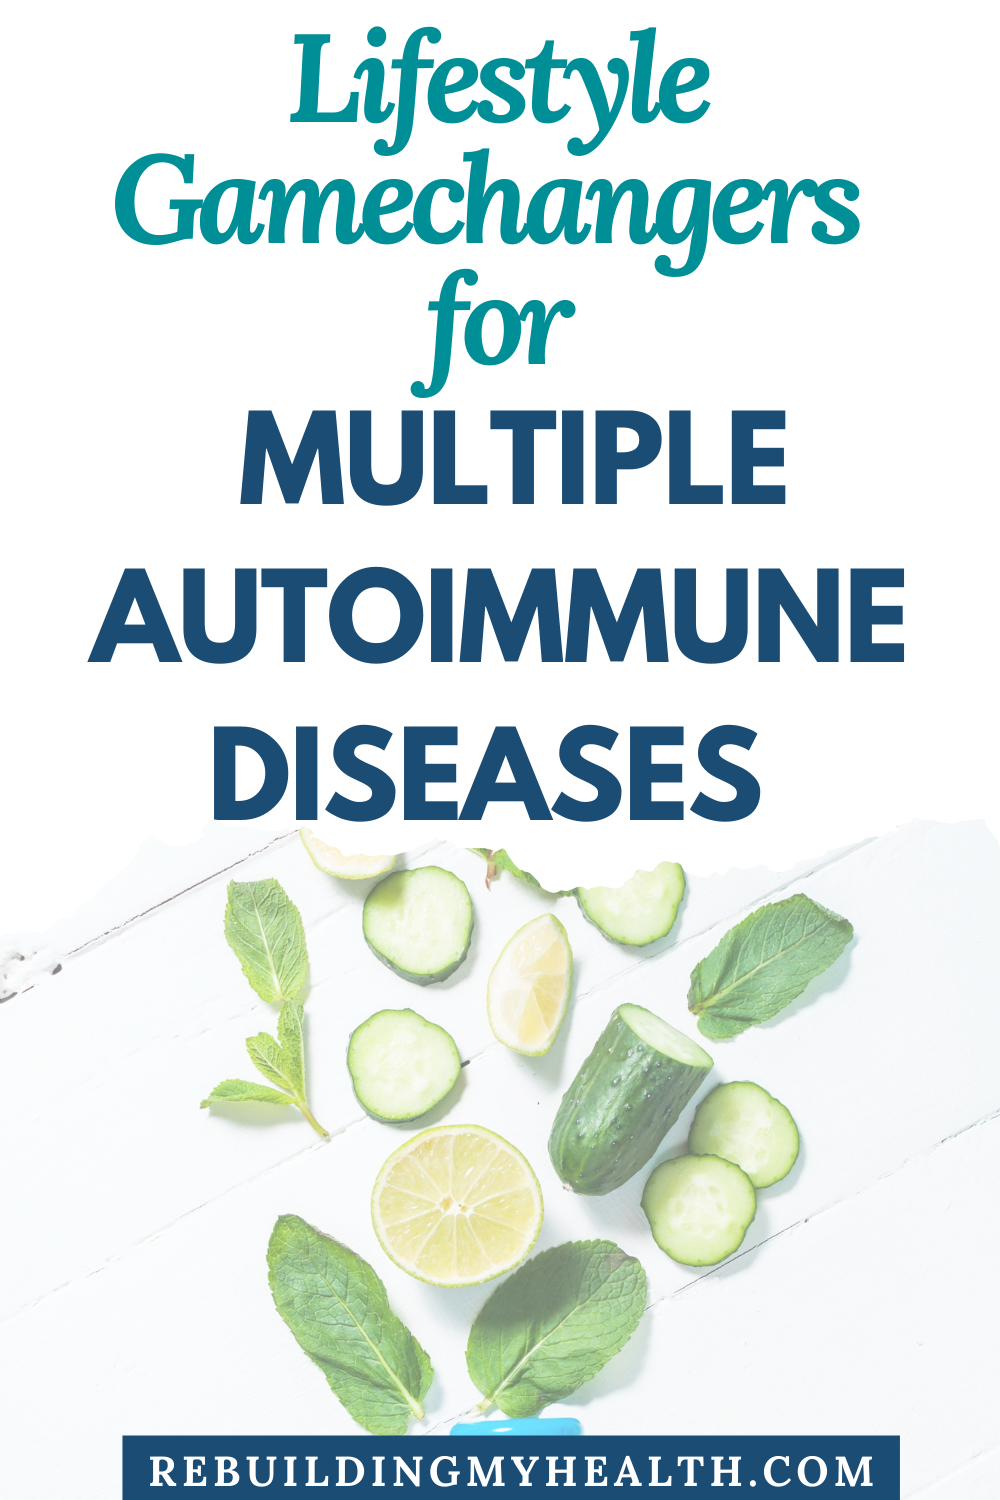 Learn about lifestyle changes for multiple autoimmune disorders, including diet, detox, exercise, stress management and other practices.